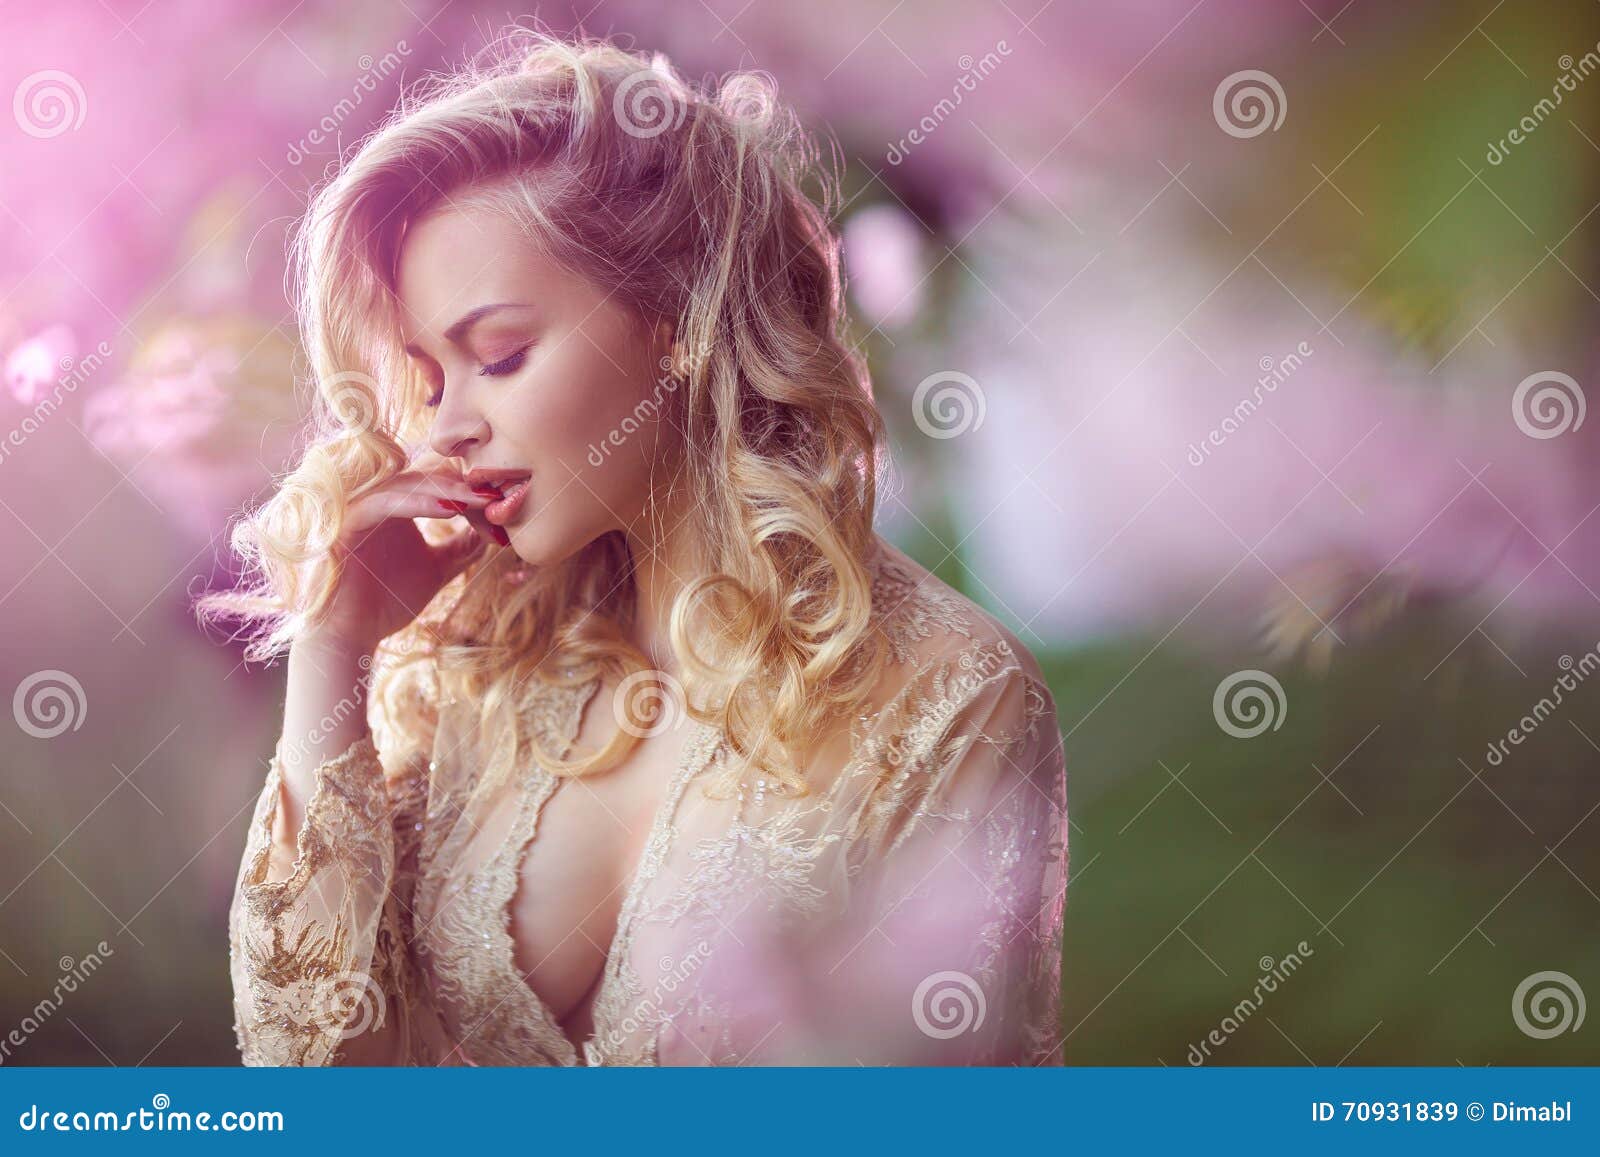 Beautiful Adult Girl Standing At Blossoming Tree In The Garden Stock Image Image Of Dream